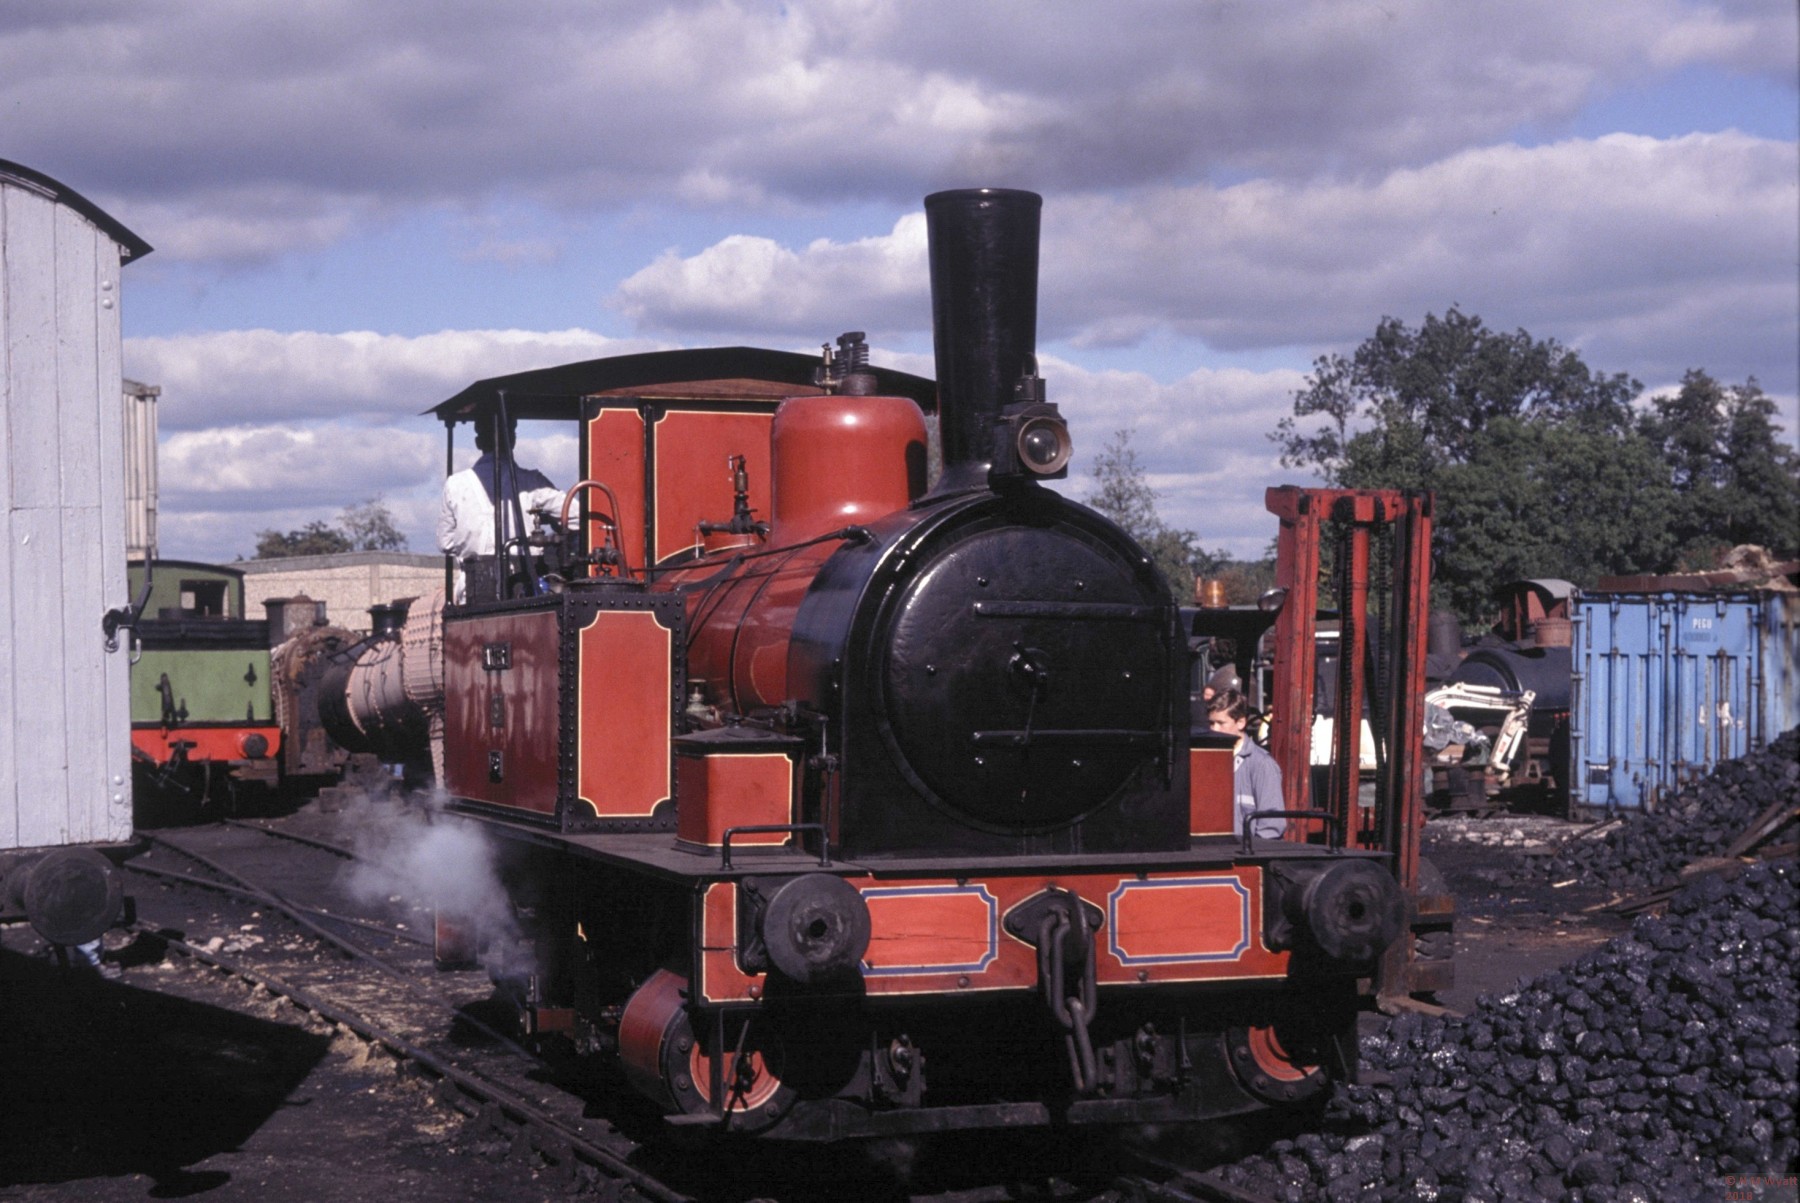 0-4-0 tank loco Captain Baxter at the Bluebell Railway in 1989